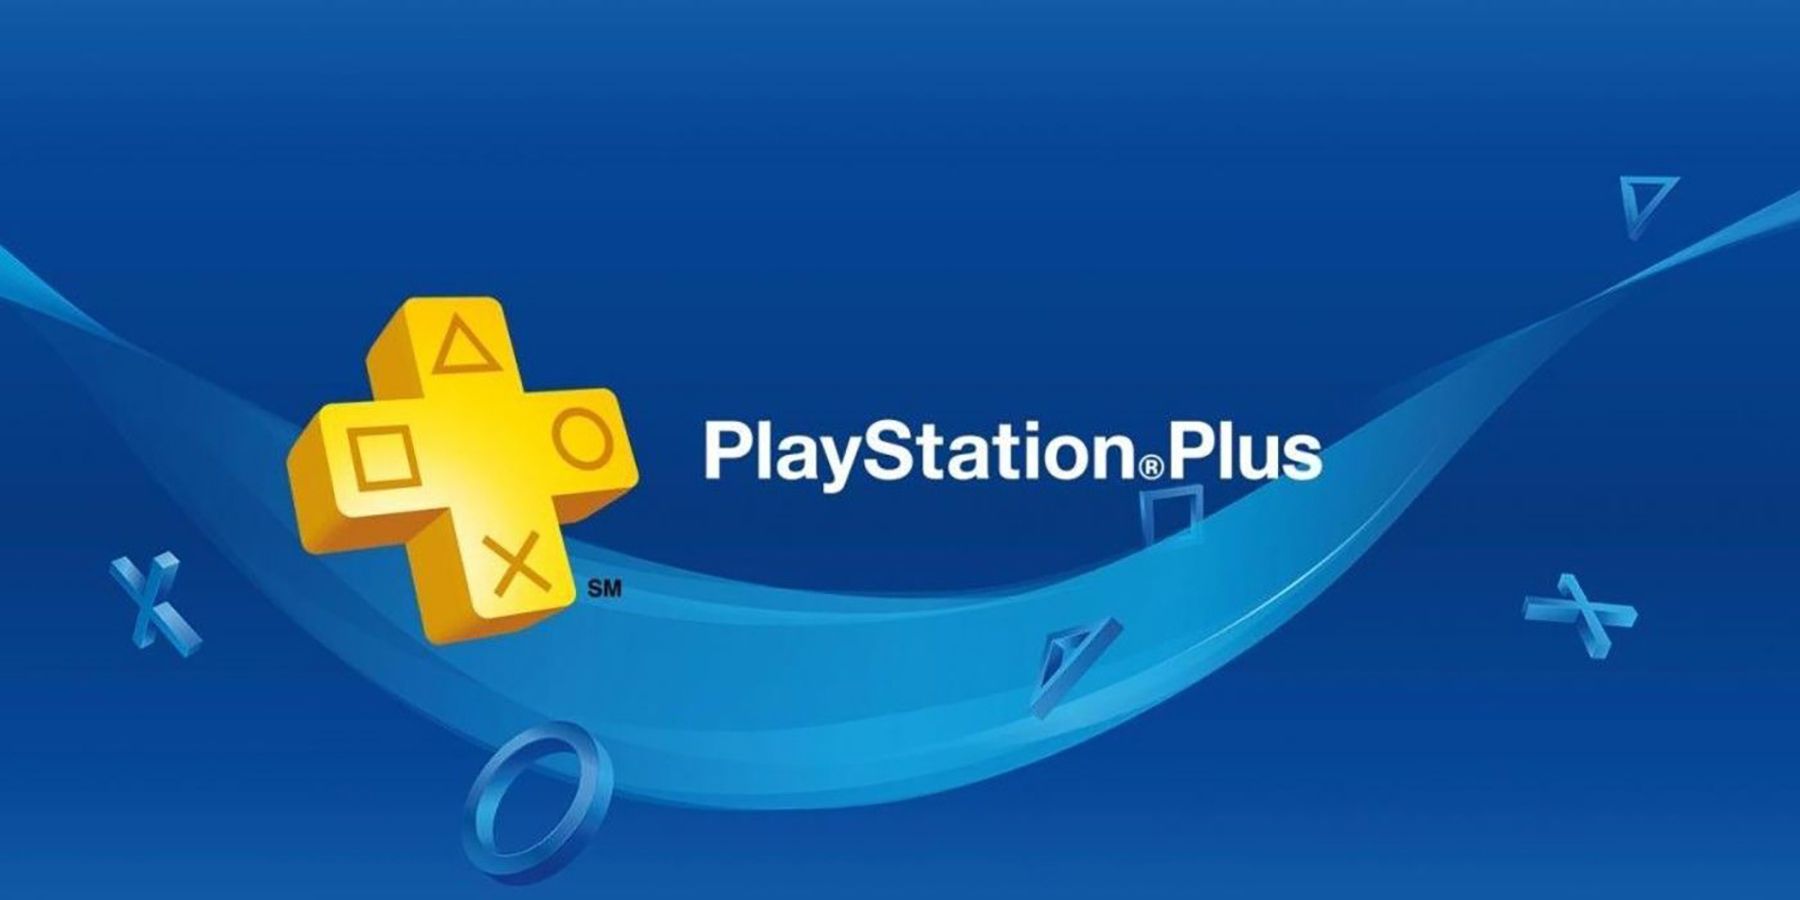 PS Plus Free Games for January 2022 Leak Online